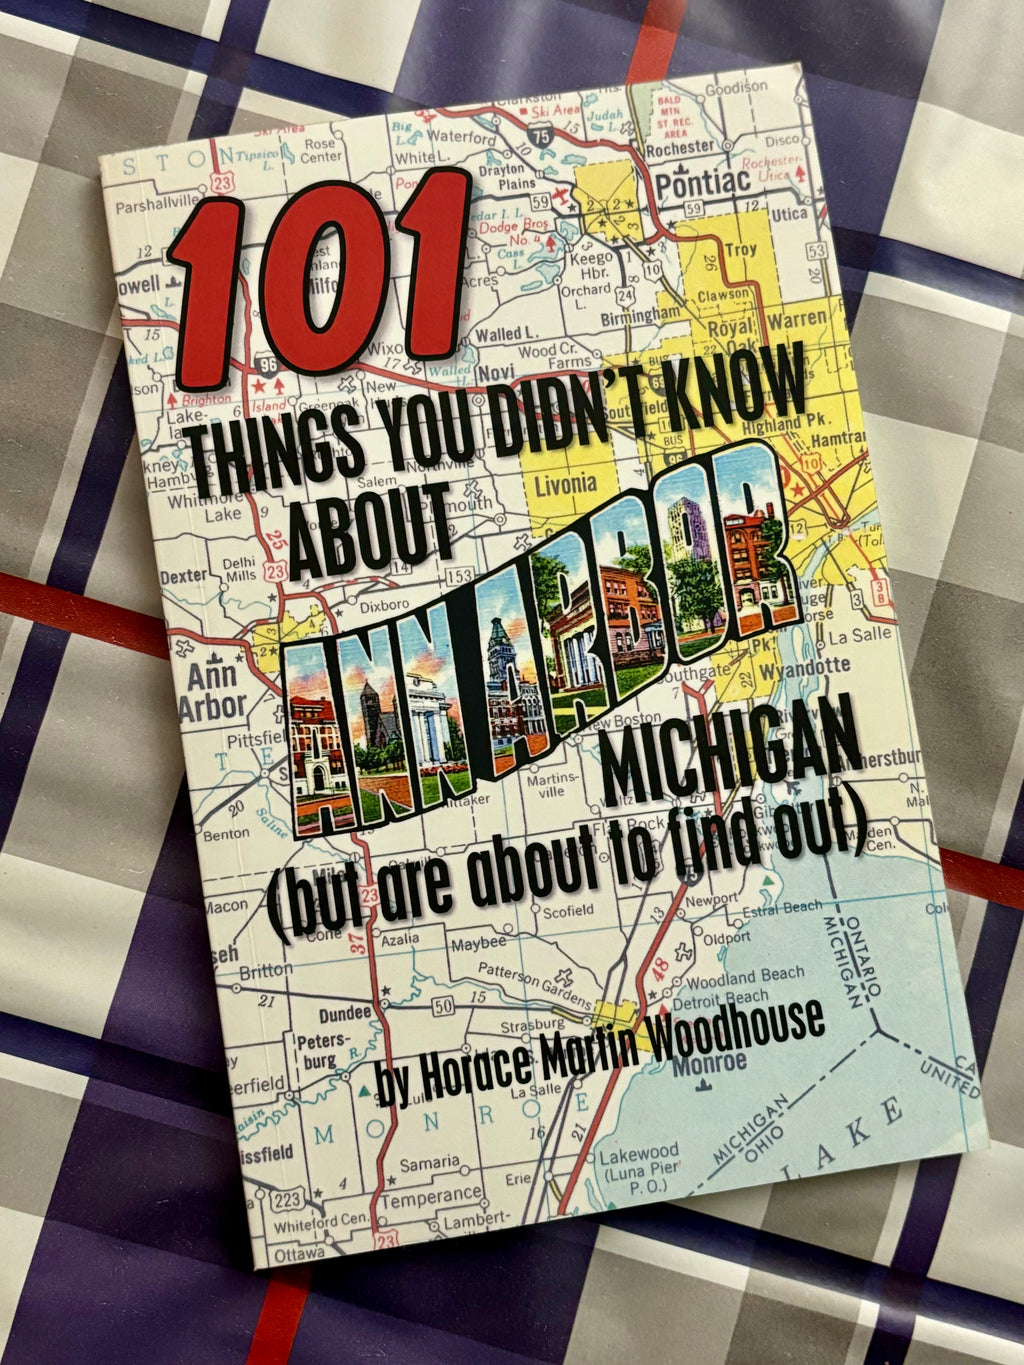 101 Things You Didn't Know About Ann Arbor Michigan (but are about to find out)- By Horace Martin Woodhouse